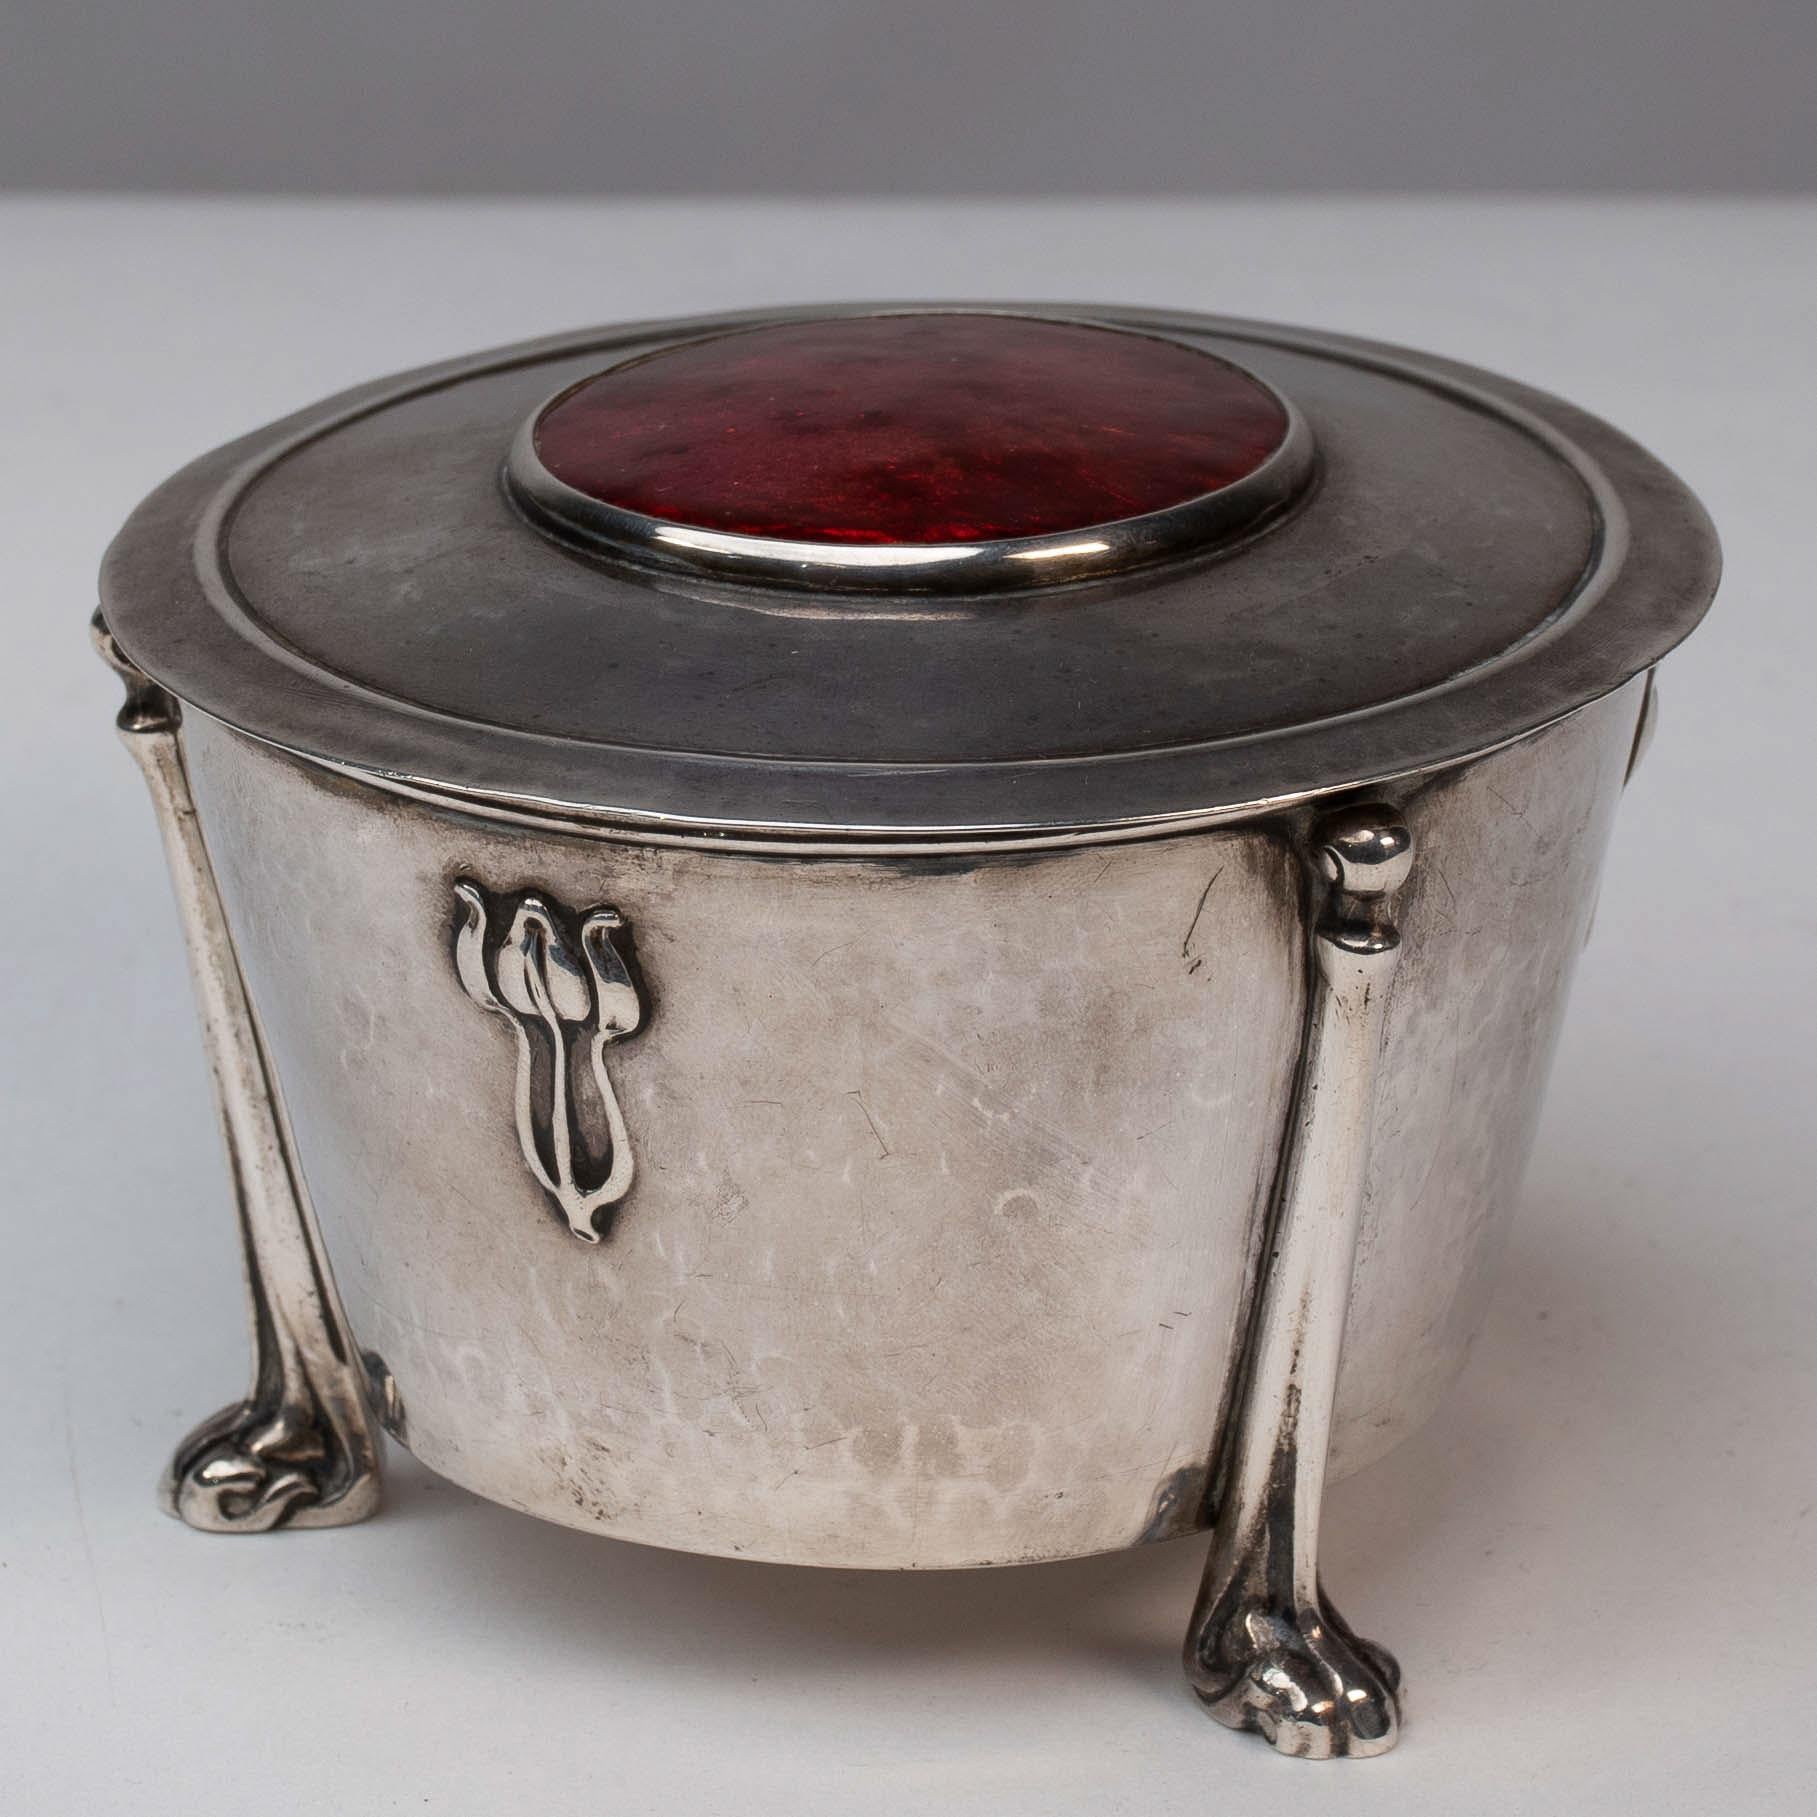 Nelson Dawson, probably made by his wife Edith Dawson.
A rare Arts & Crafts silver bowl with a red enamel lid and a particular E Dawson floral decoration to the sides, on four elongated footed legs that attach to the entire sides, again typical of